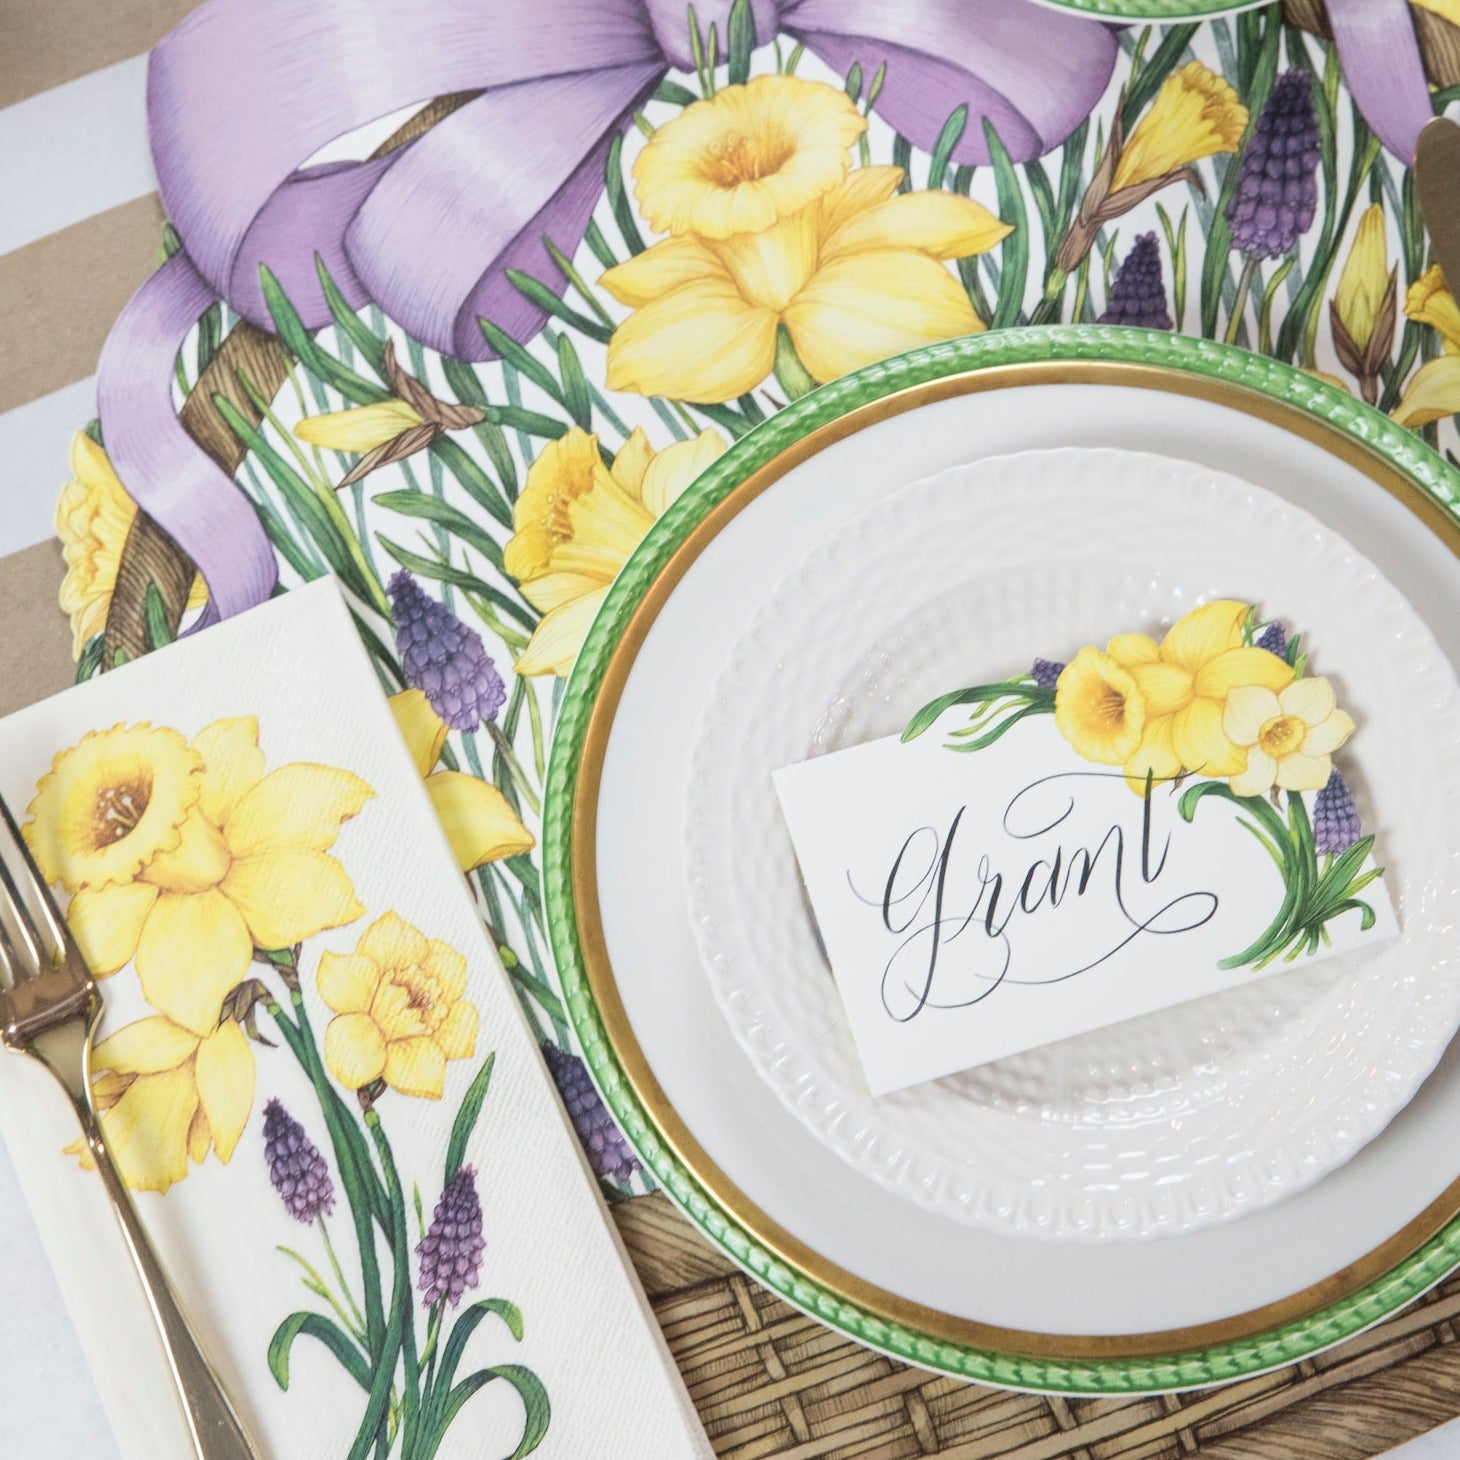 A Hester &amp; Cook Daffodil Place Card labeled &quot;Grant&quot; laying flat on a plate in an elegant place setting.